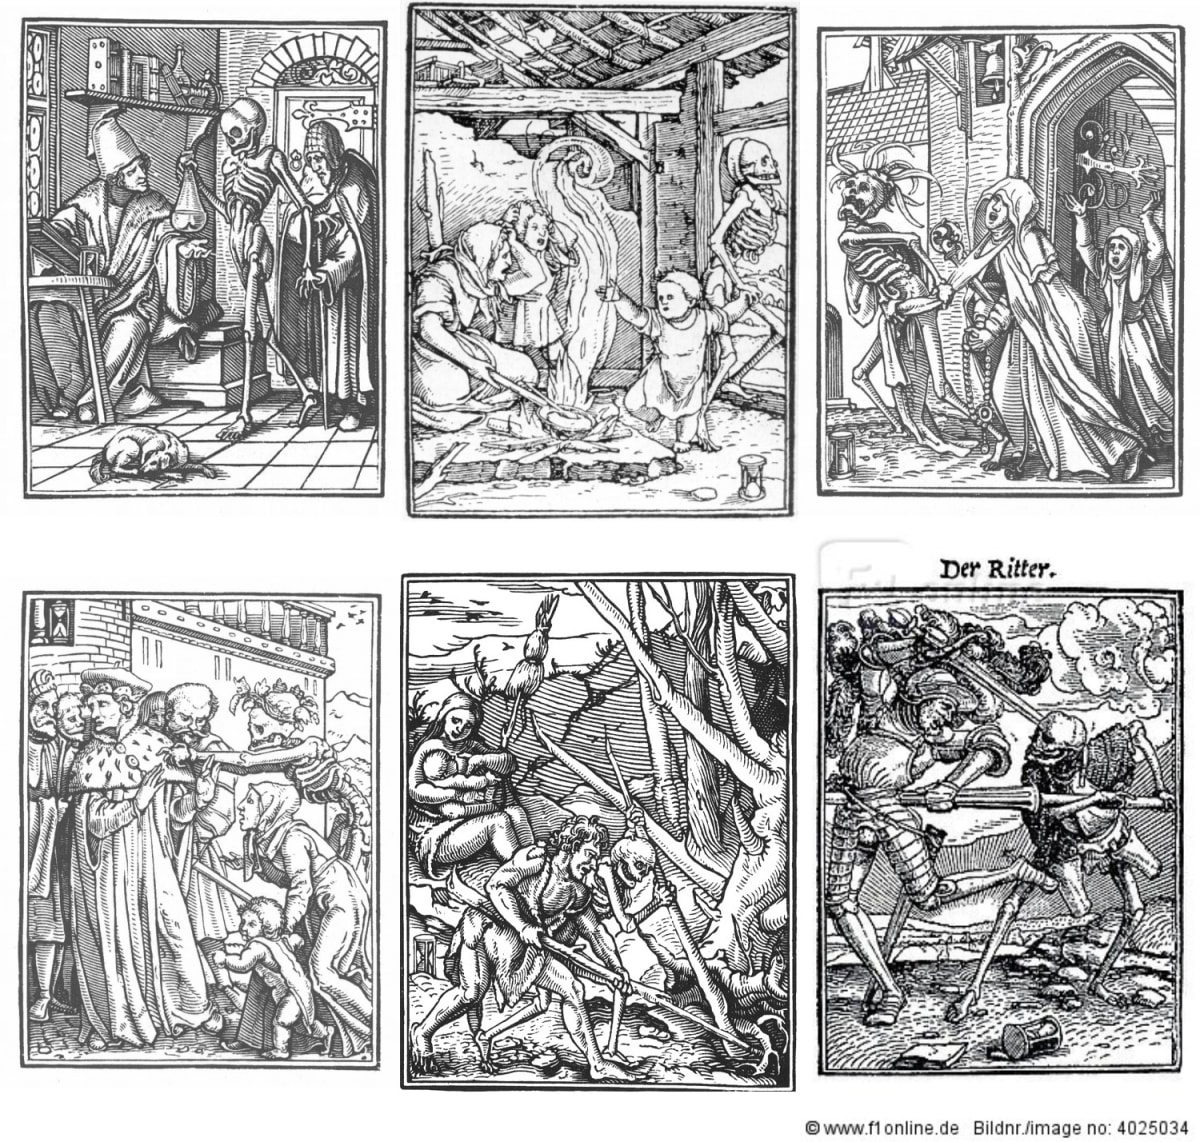 The Complete First Latin edition of Totentanz by Hans Holbein 